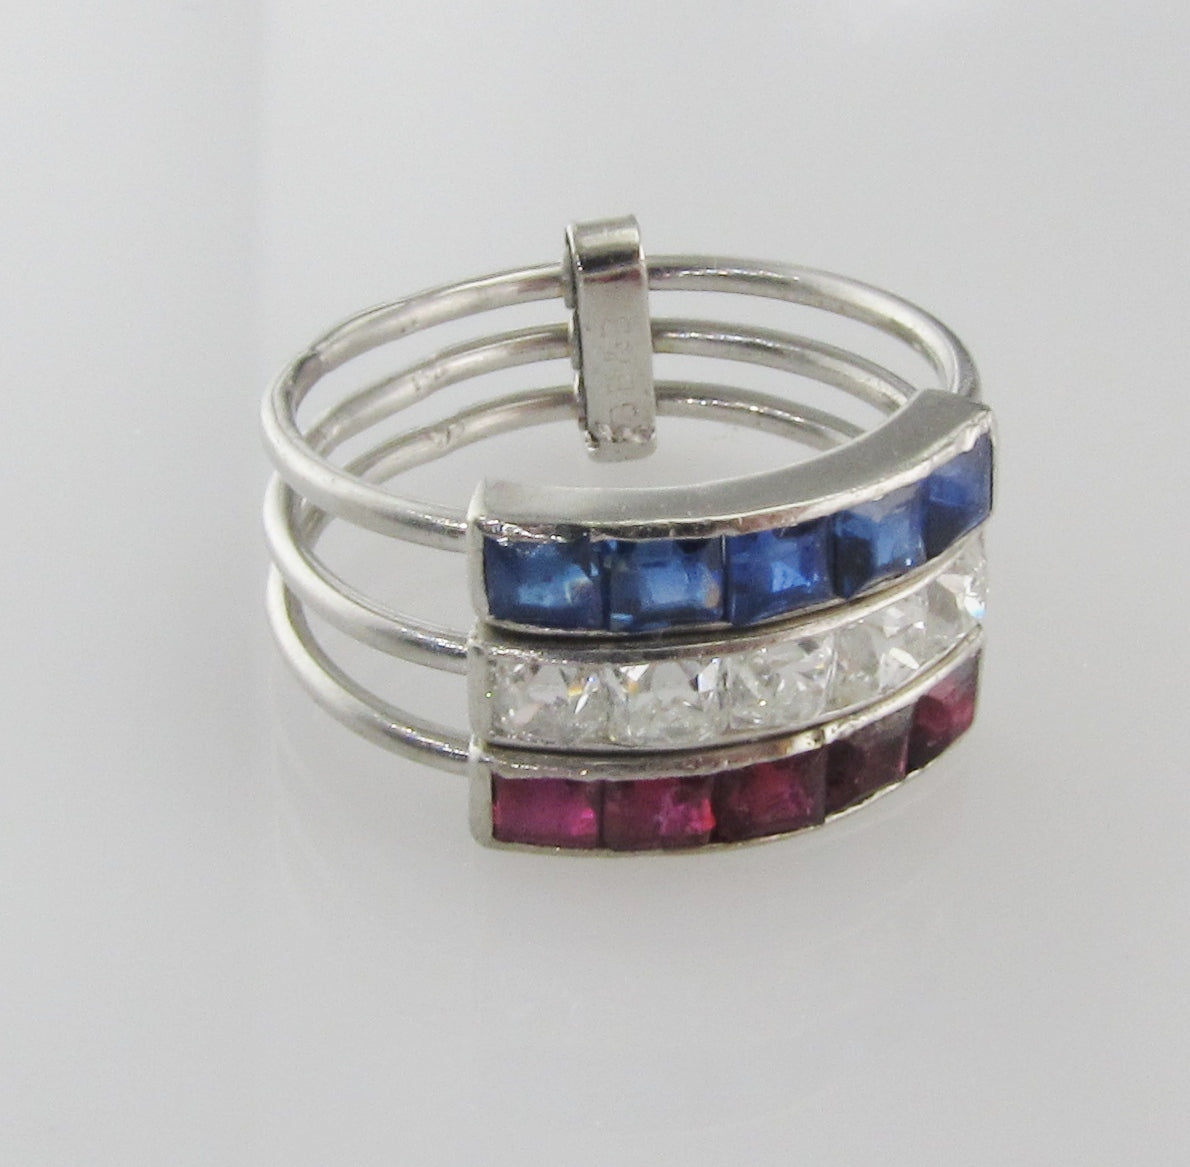 Red, White, and Blue Ring